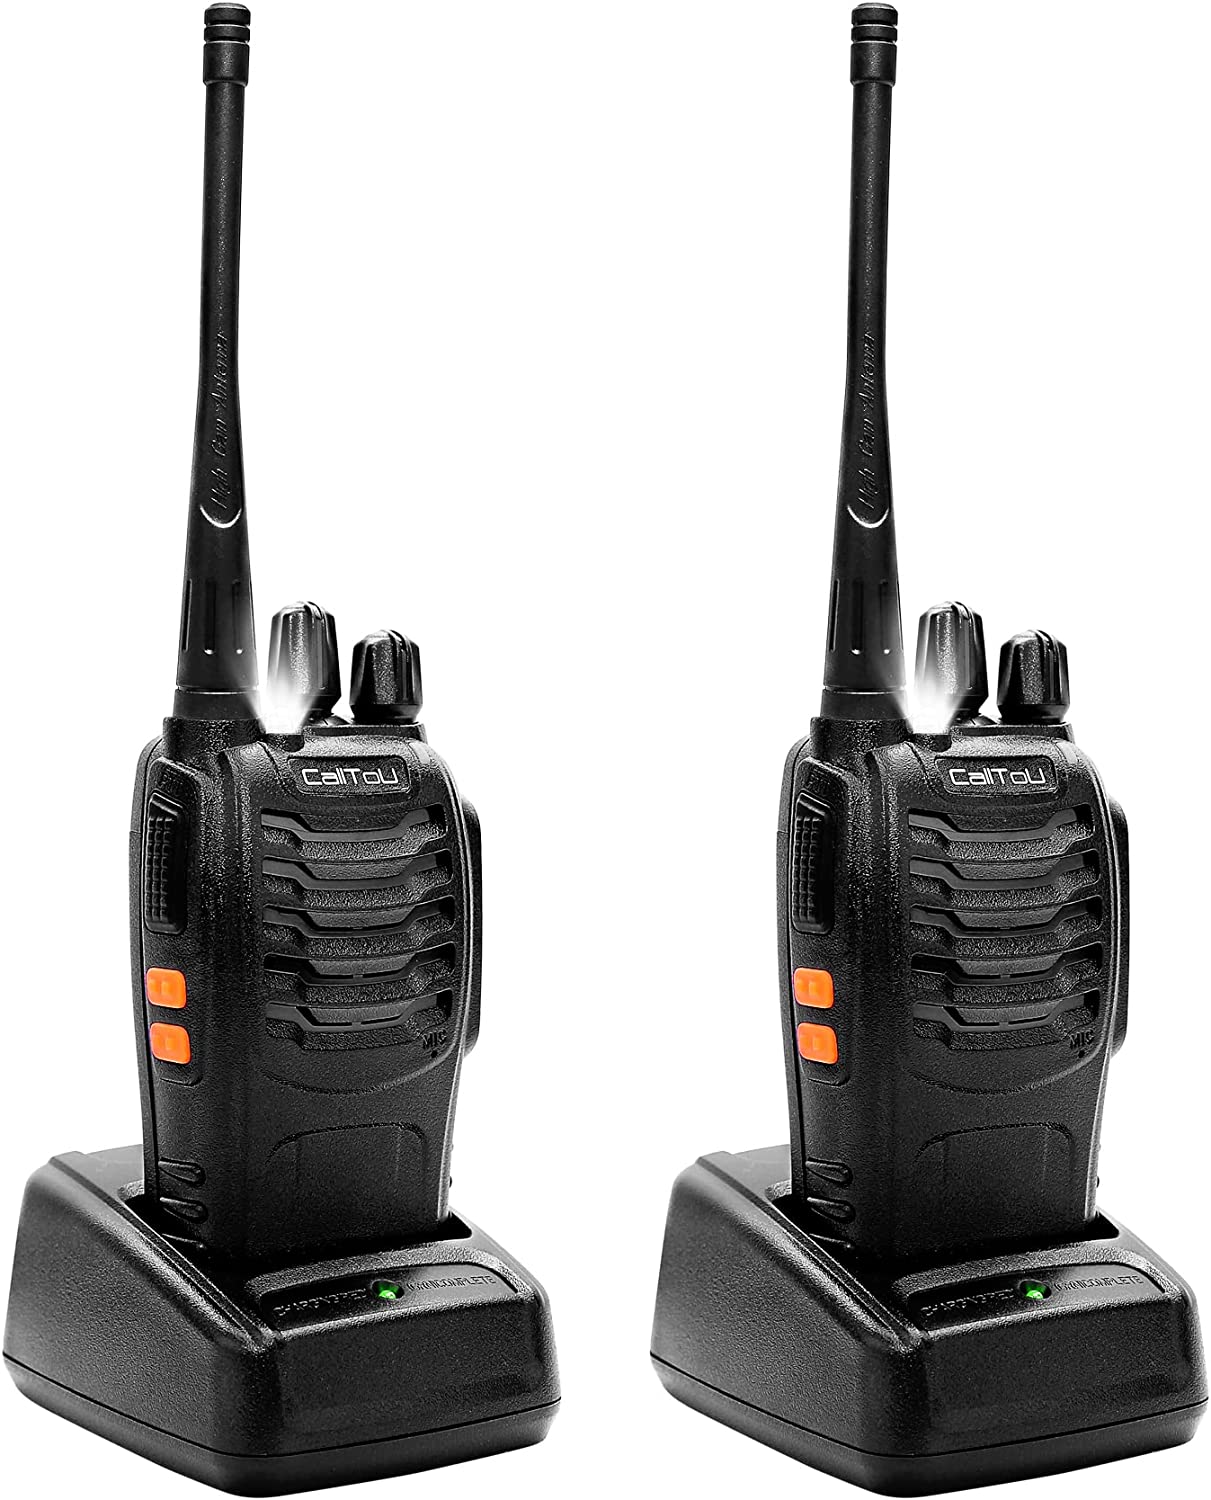 CallToU Walkie Talkies Pack for Home Business Hiking Camping